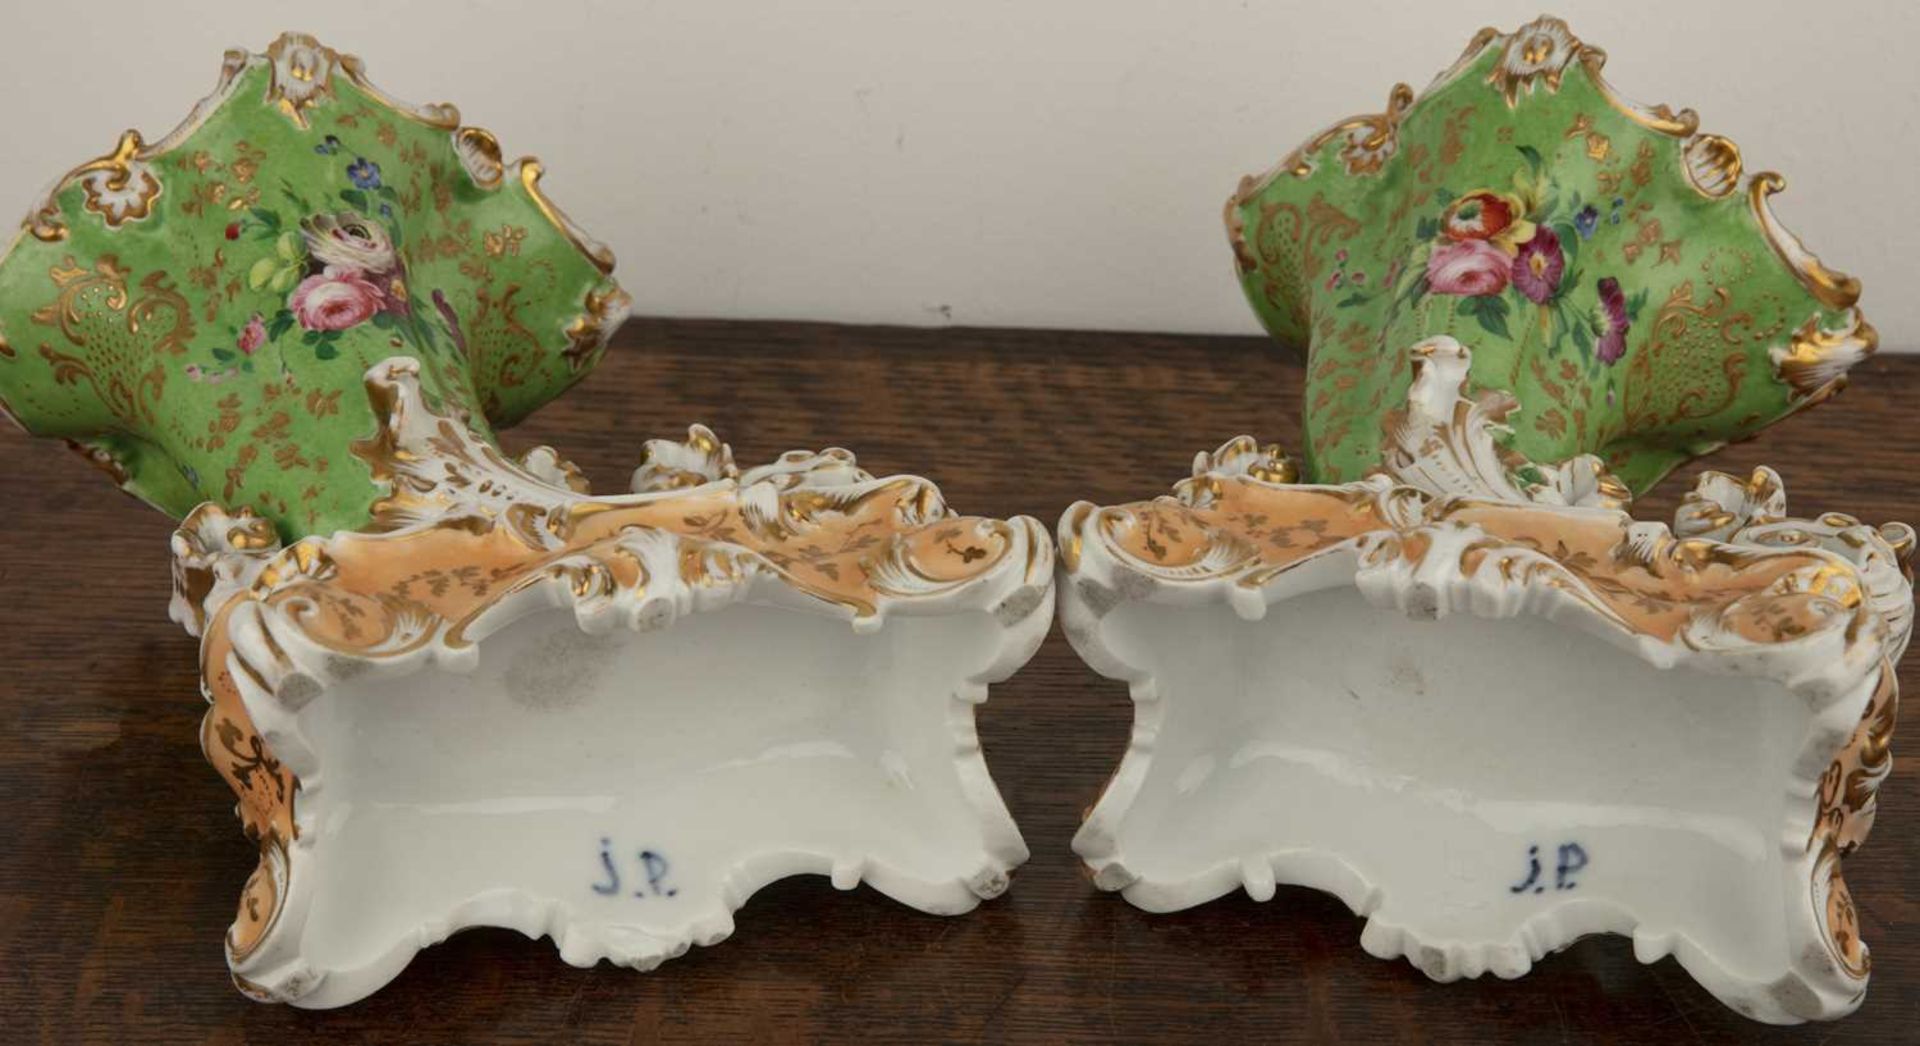 Pair of Jacob Petit porcelain cornucopia vases decorated with flowers and gilt highlights on an - Image 3 of 4